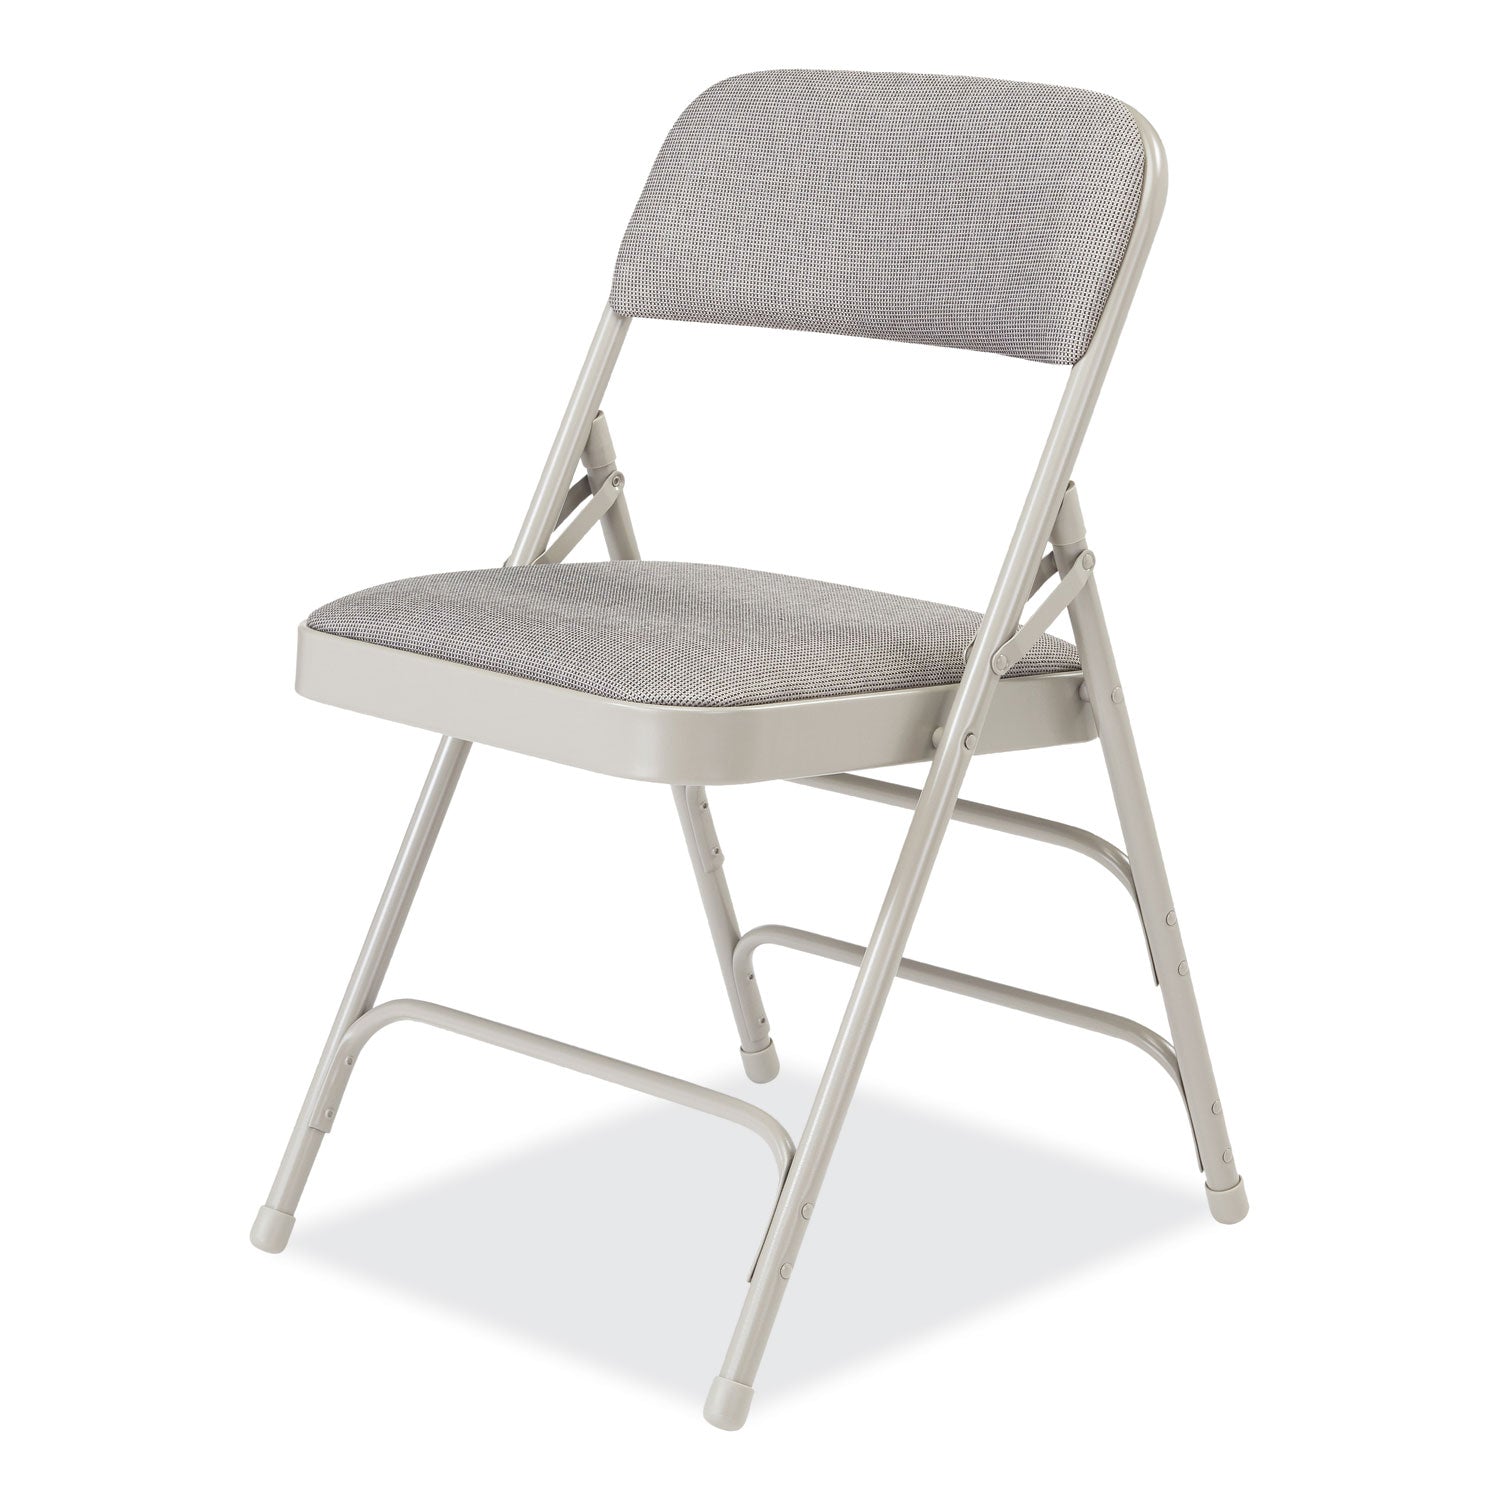 2300-series-fabric-triple-brace-double-hinge-premium-folding-chair-supports-500-lb-greystone-4-ct-ships-in-1-3-bus-days_nps2302 - 3